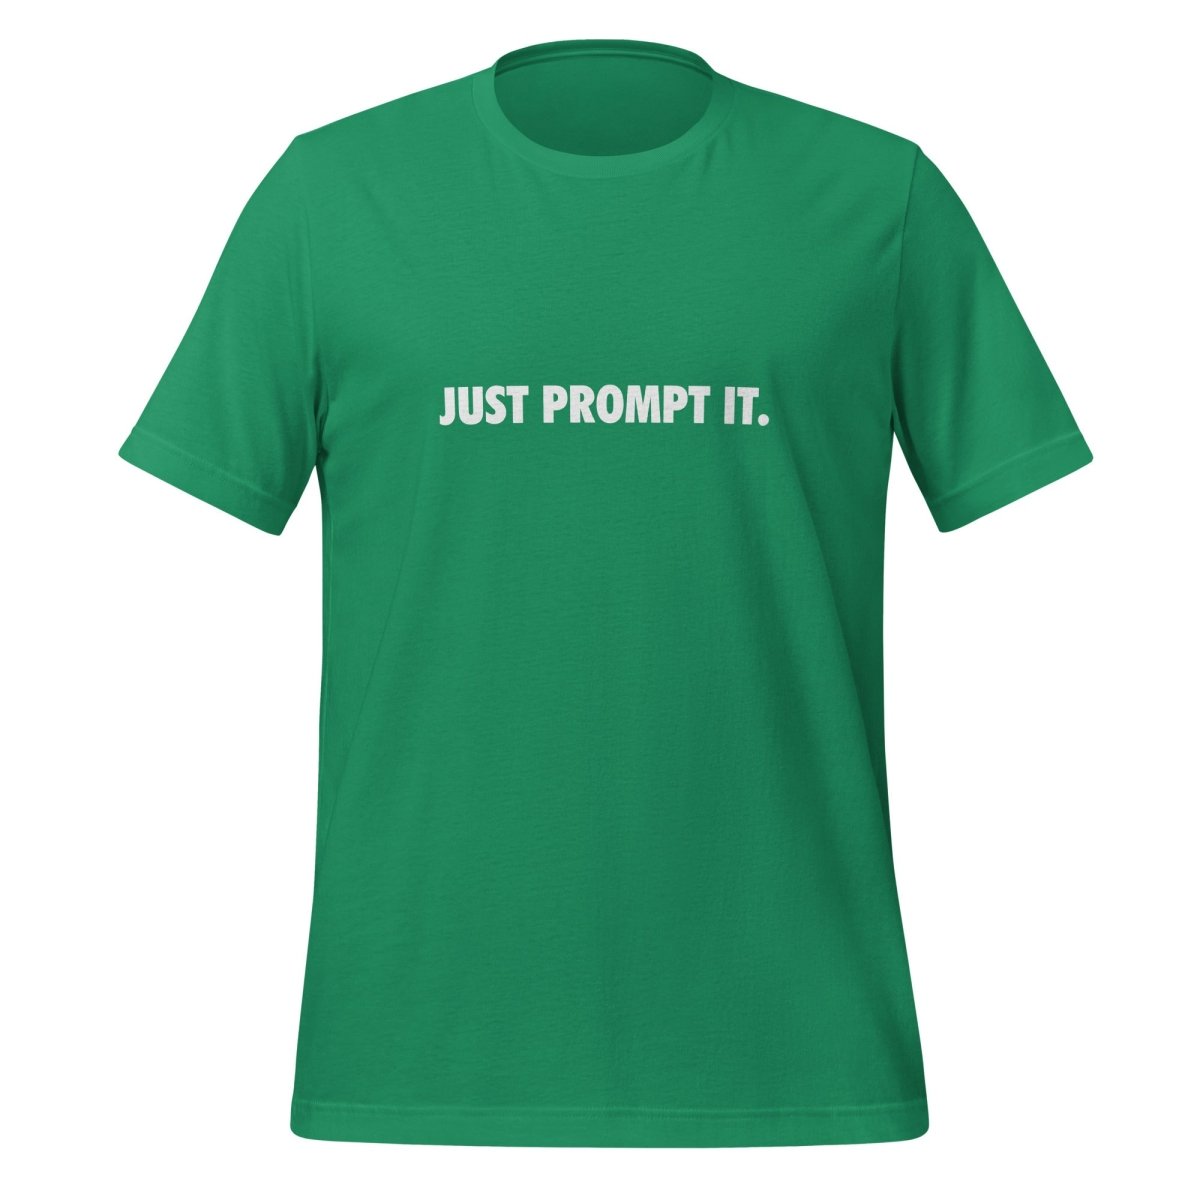 JUST PROMPT IT. T - Shirt (unisex) - Kelly - AI Store